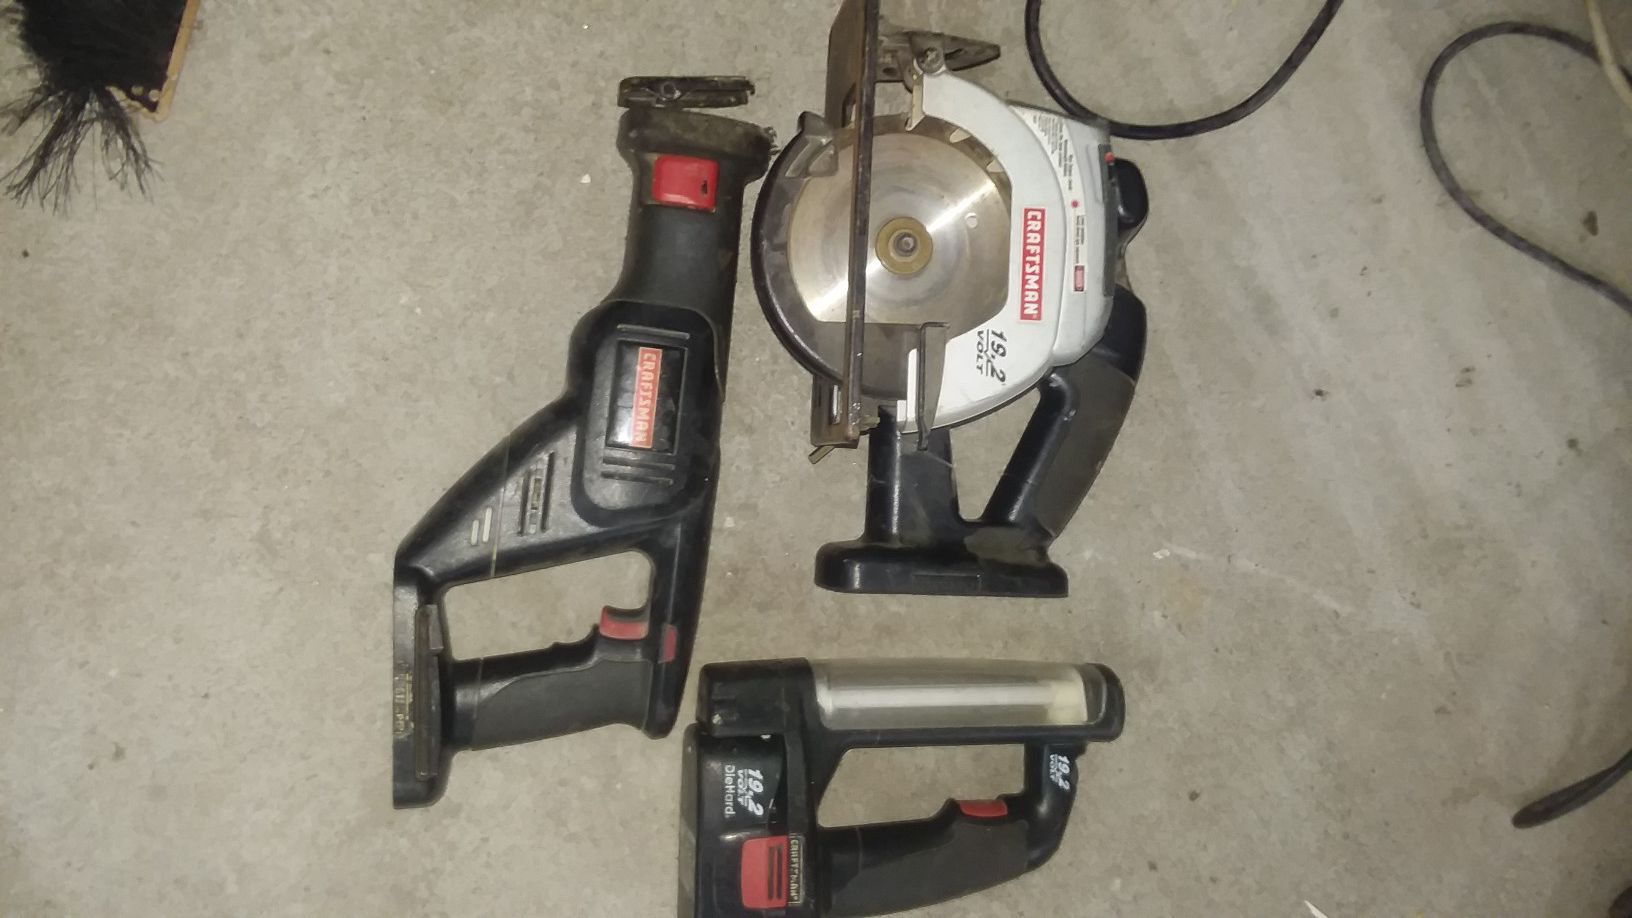 craftsman cordless saw,sawsoff,shop light no charger one battery